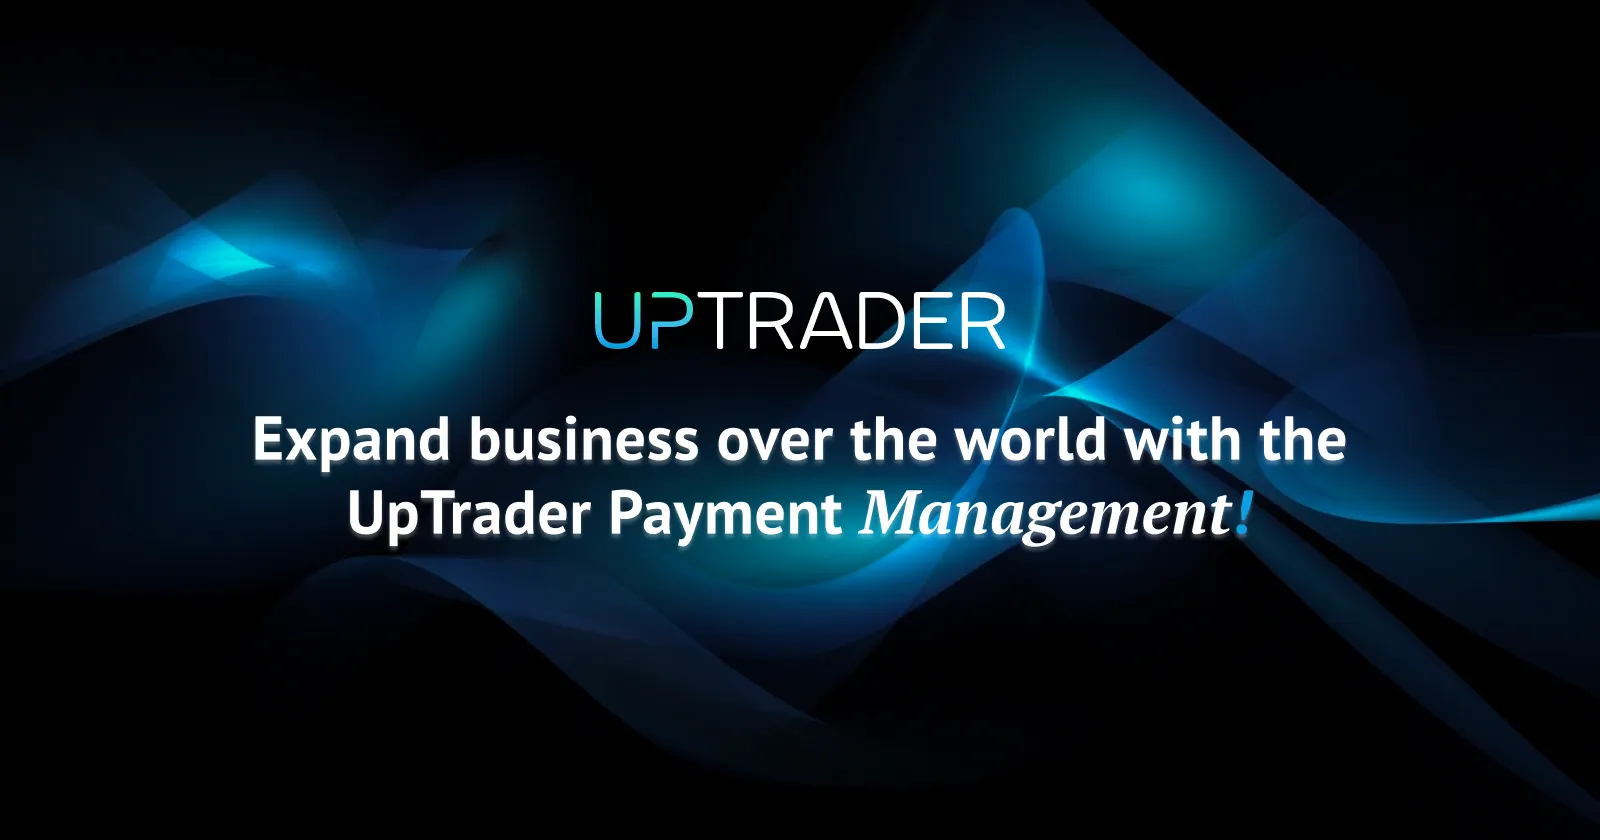 Expand your business worldwide with UpTrader Pay!